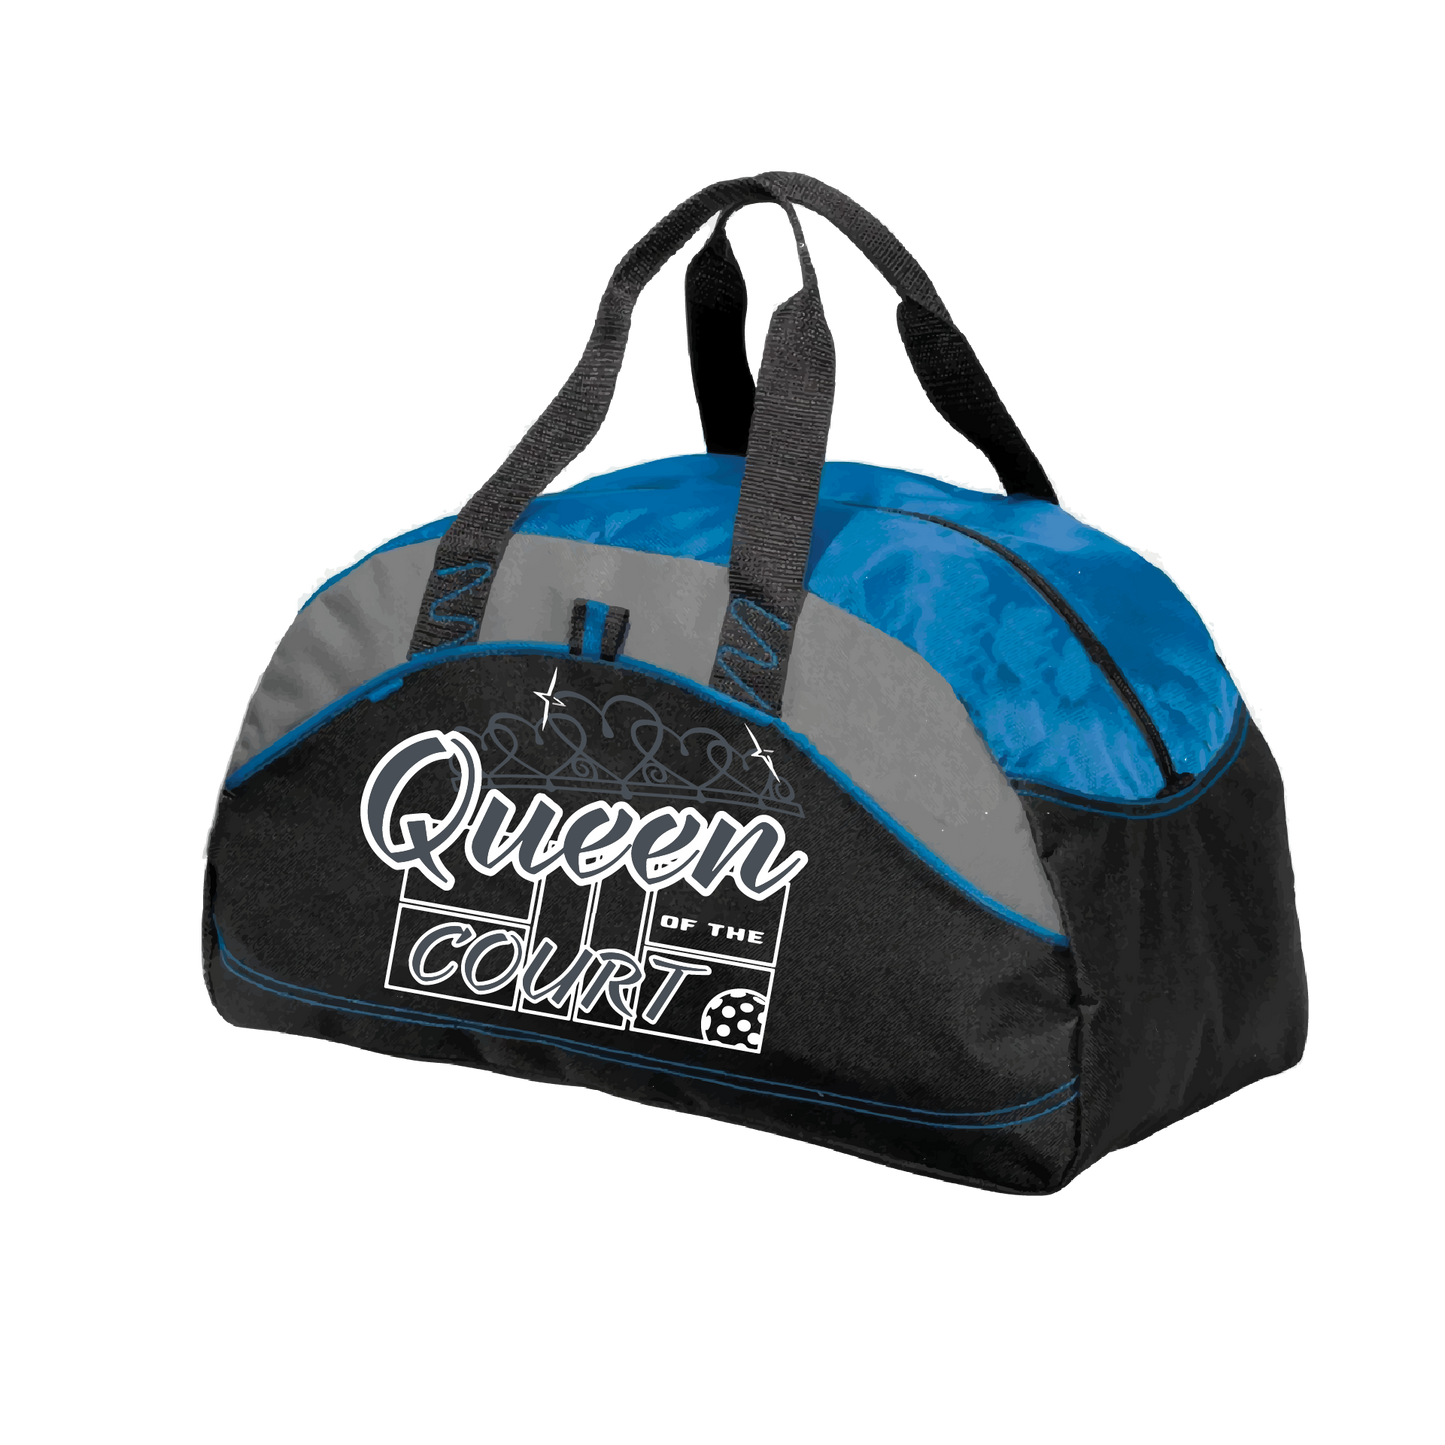 Pickleball Duffel Bag Design: Queen of the Court  Carry your gear in comfort and style. This fun pickleball duffel bag is the perfect accessory for all pickleball players needing to keep their gear in one place. This medium sized duffel tote is ideal for all your pickleball activities. The large center compartment allows for plenty of space and the mesh end pocket is perfect for holding a water bottle. 